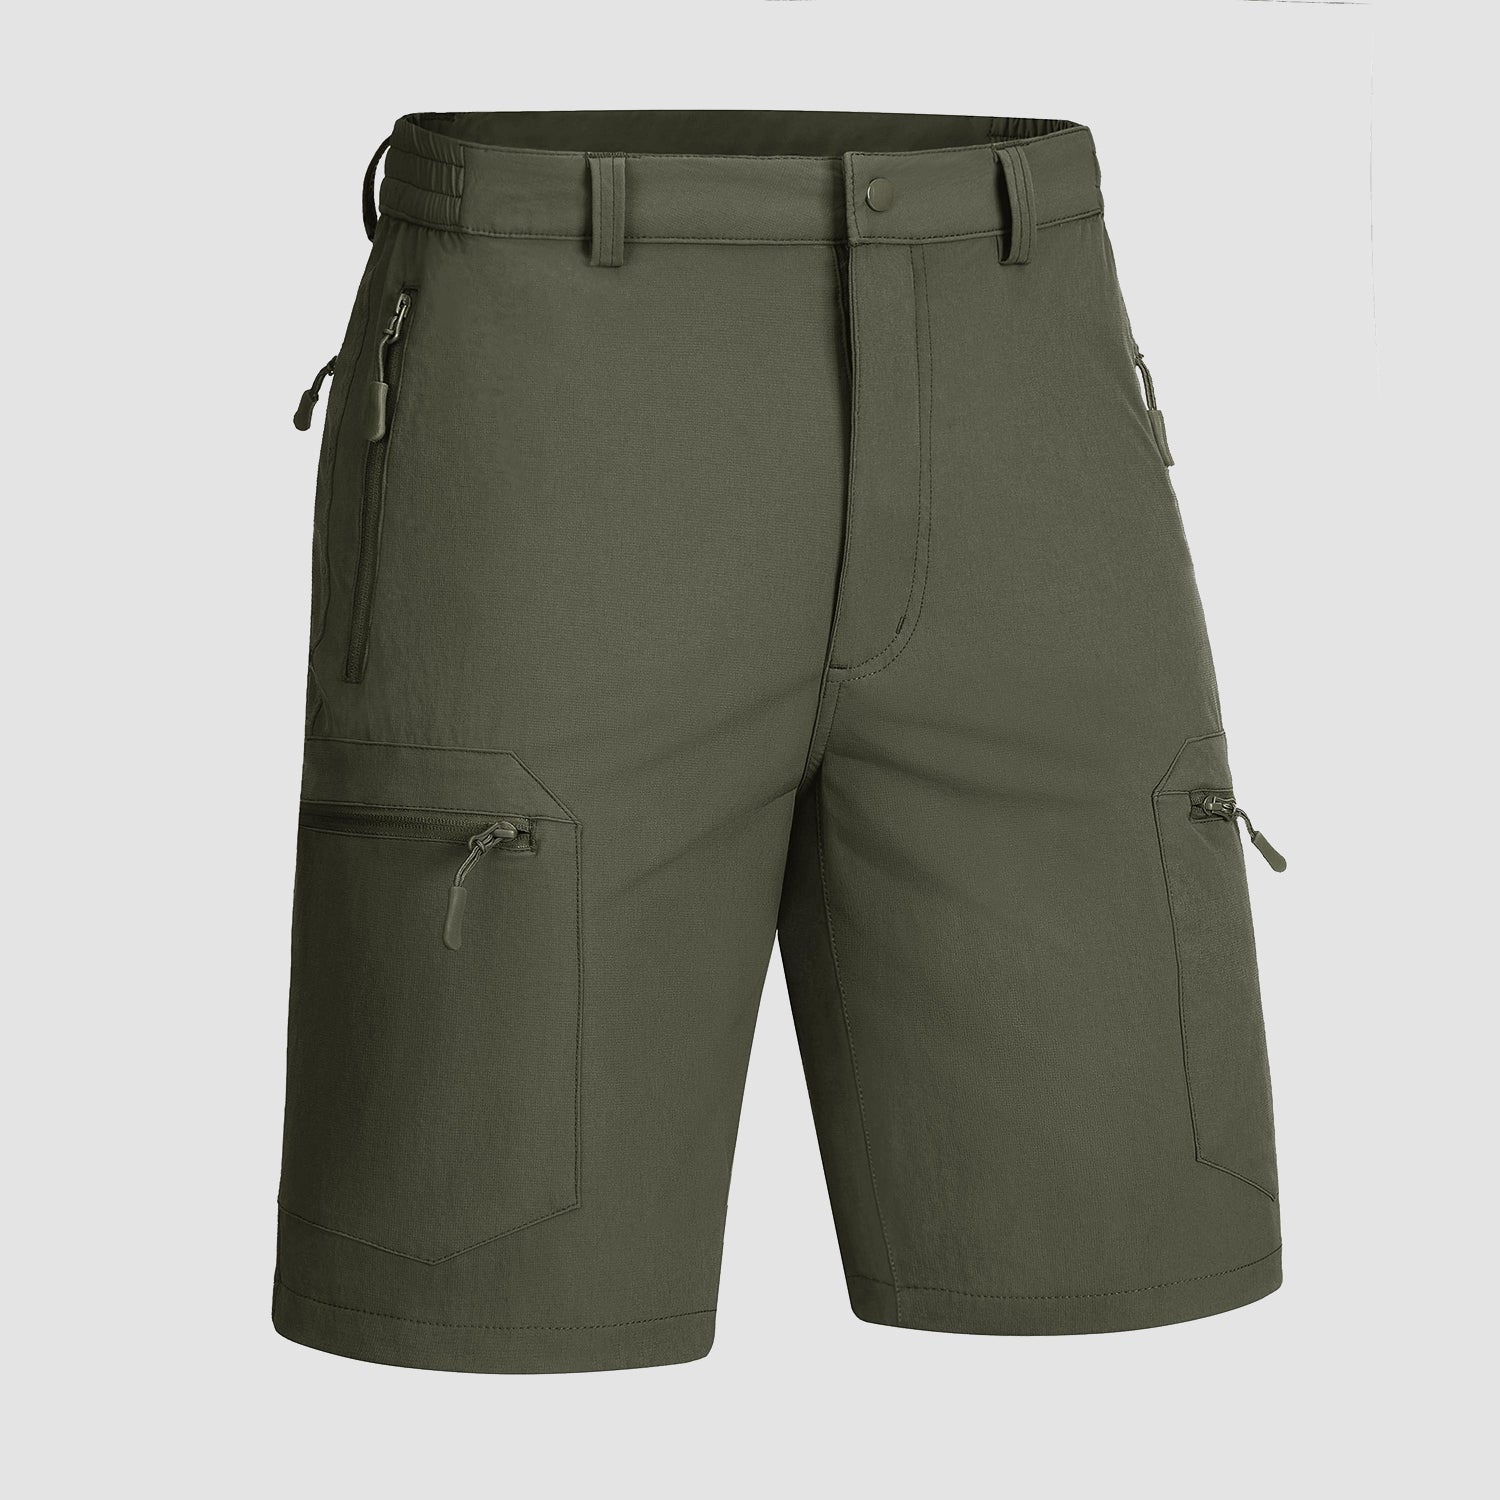 Men's Hiking Shorts with 5 Zipper Pockets Water-Resistant Ripstop Outdoor Shorts